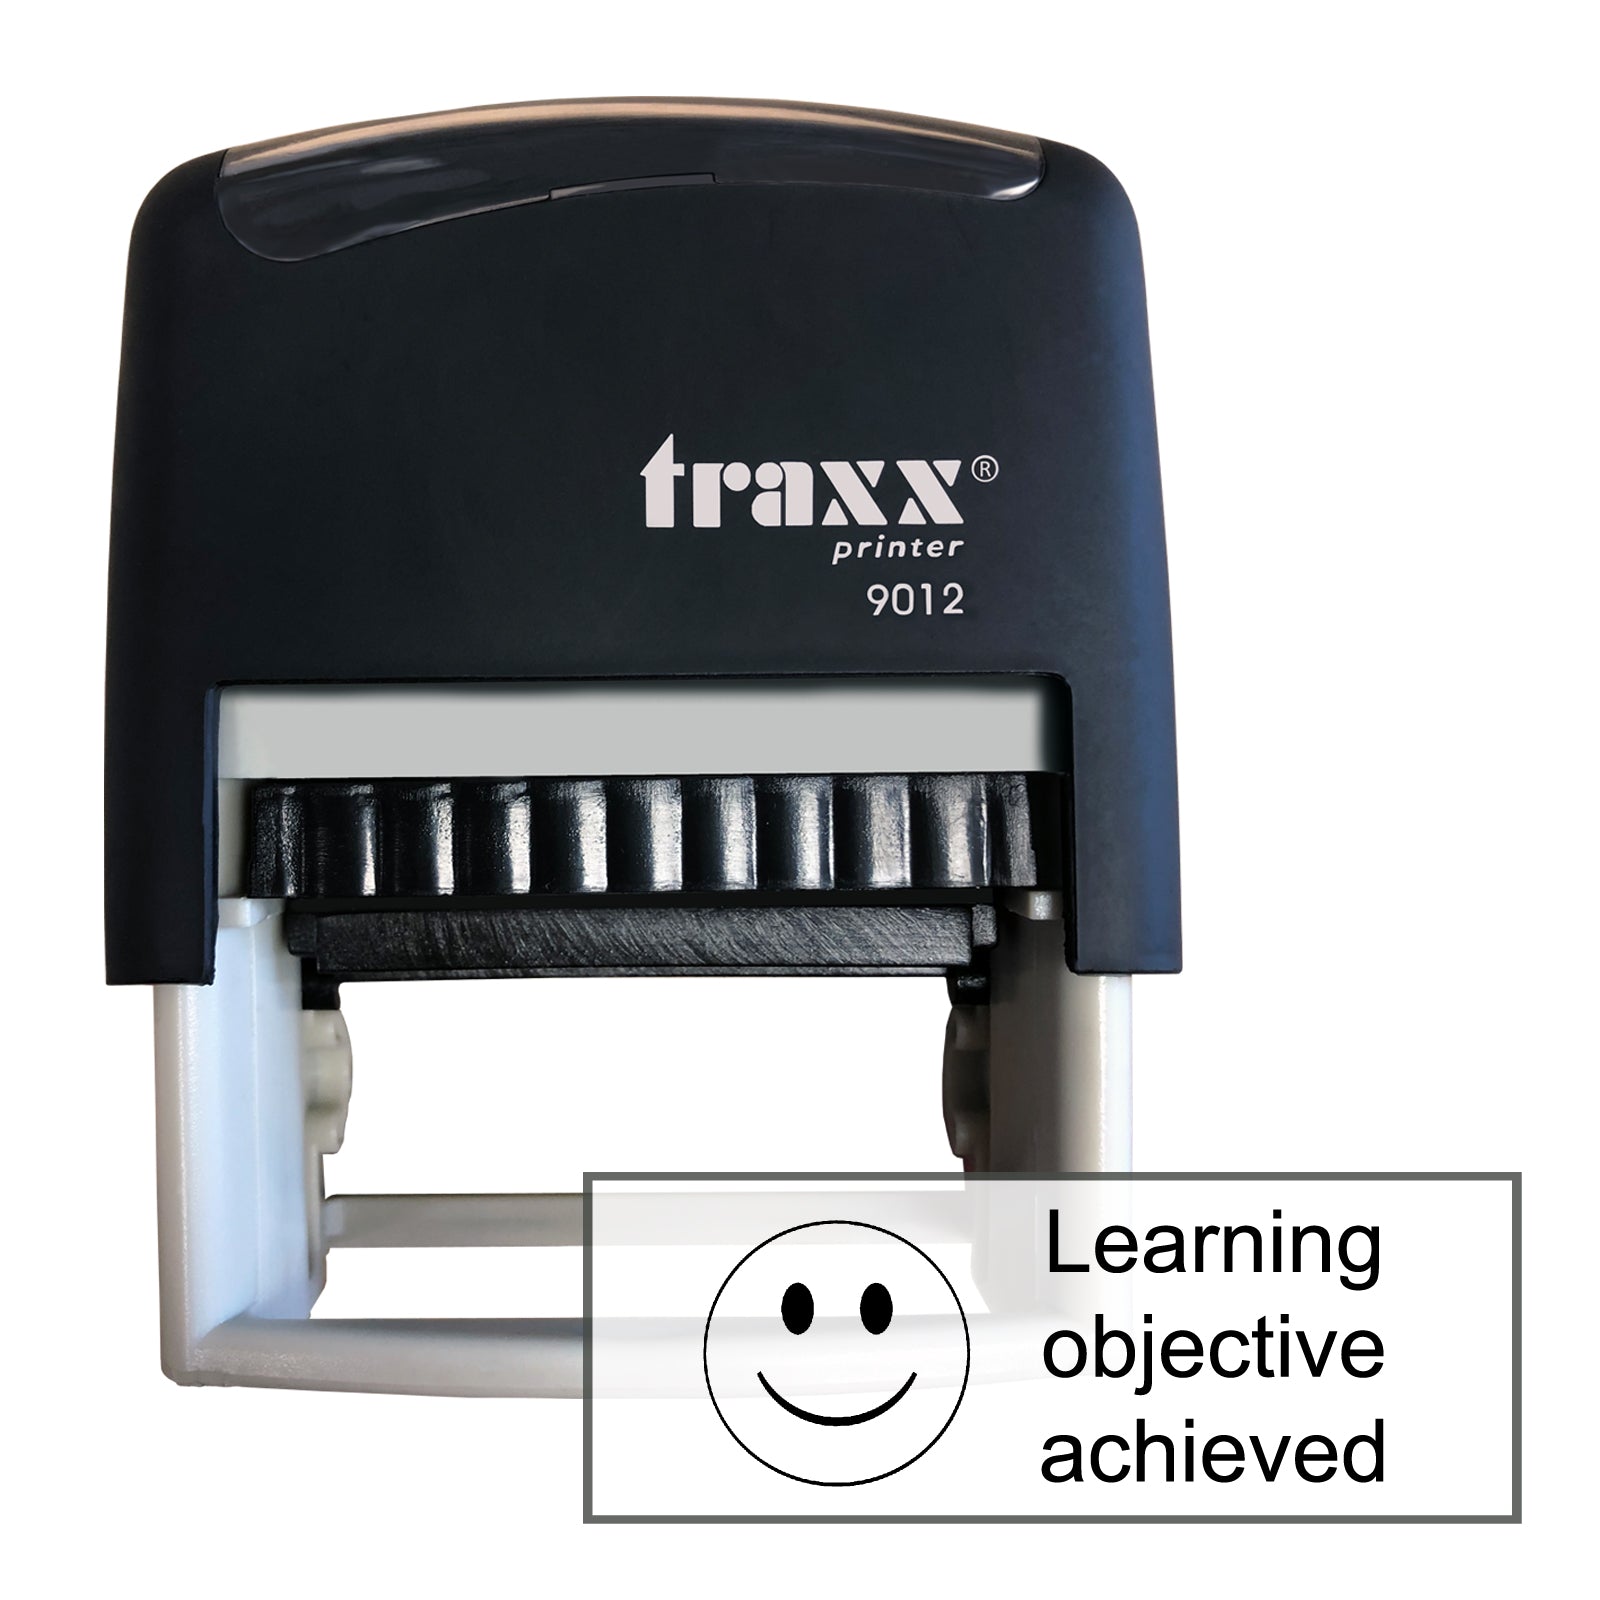 Traxx 9012 48 x 18mm Assessment Stamp - Learning objective achieved